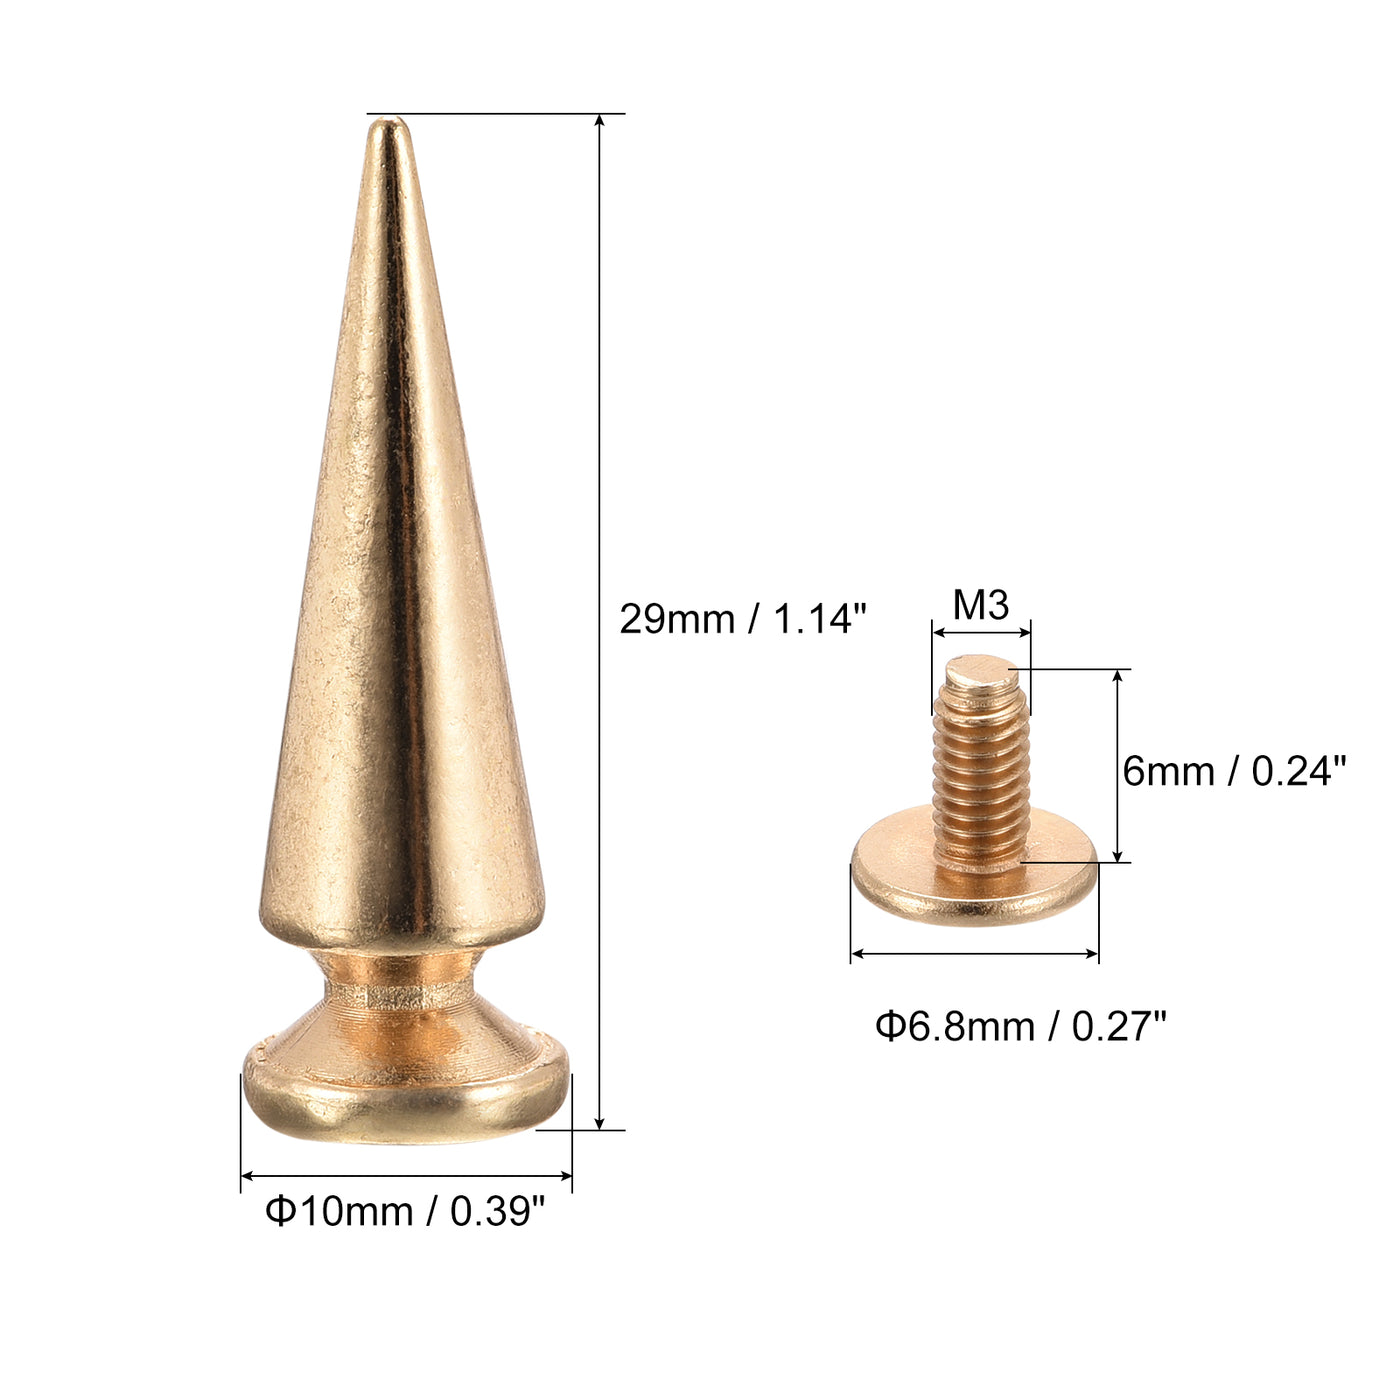 Uxcell Uxcell 10x29mm Screw Back Stud Rivets Spikes Zinc Alloy for DIY Gold Tone 30 Sets